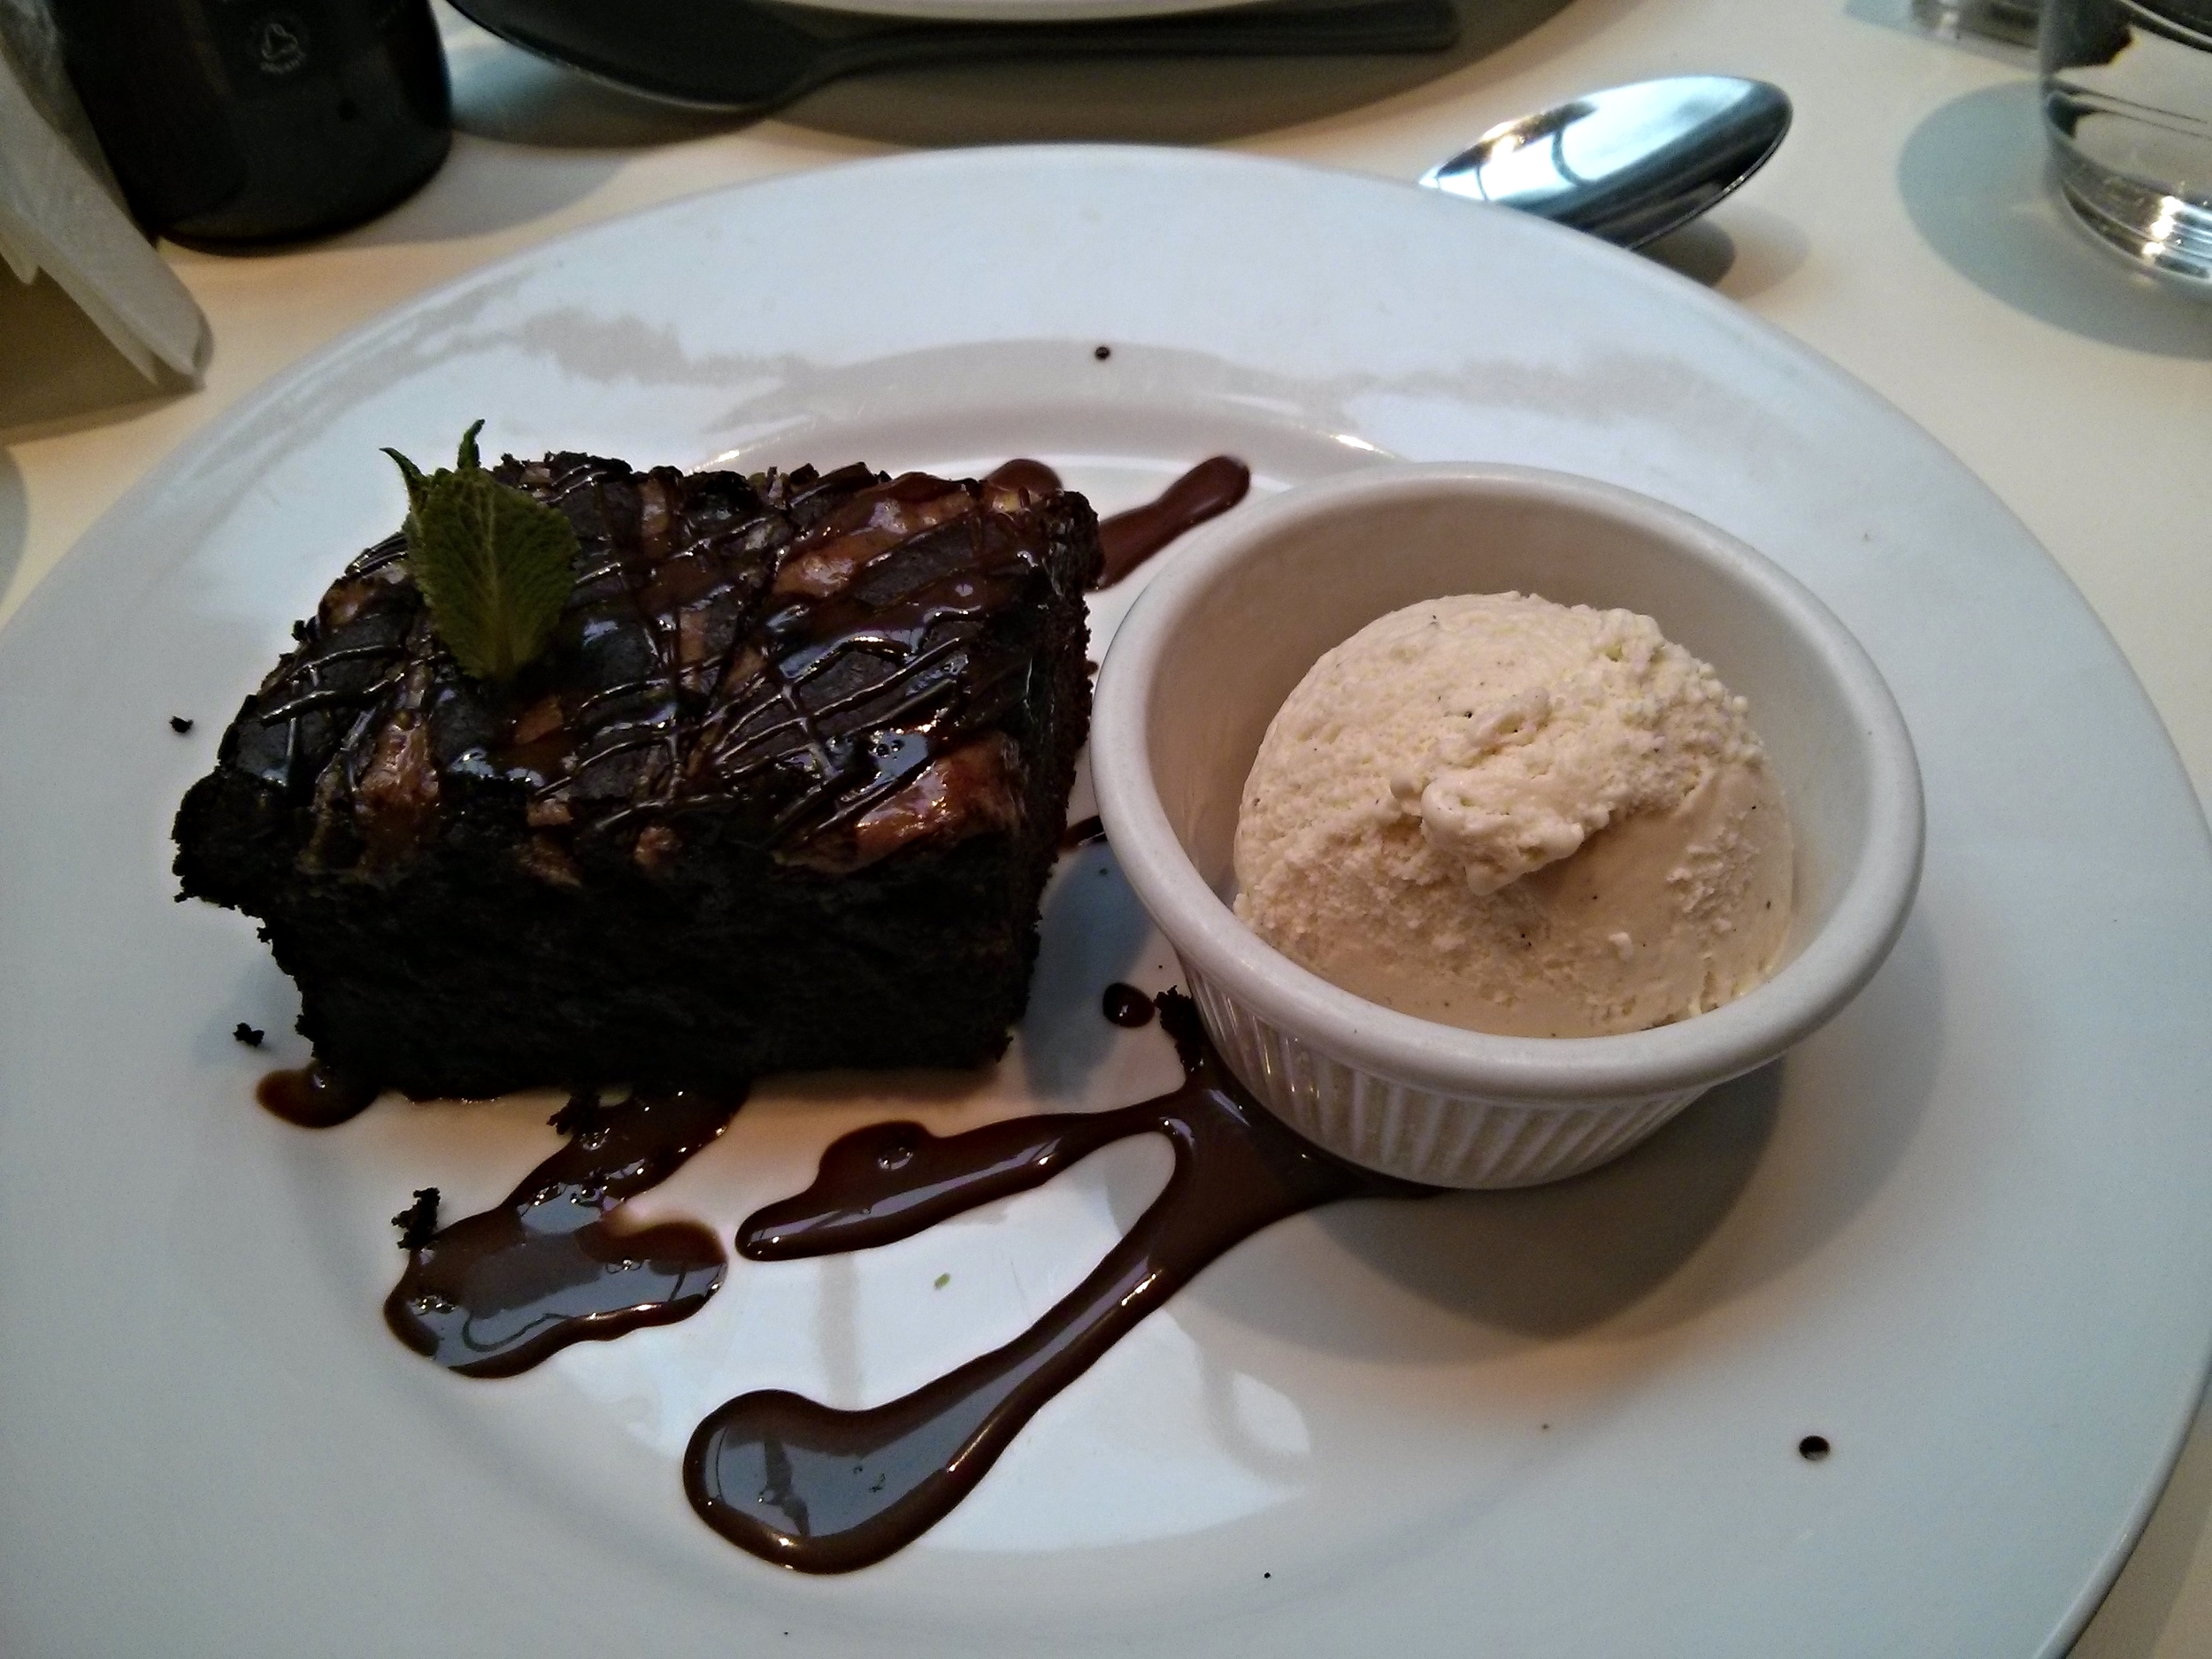 Chocolate and peanut butter brownie with chocolate sauce and vanilla ice cream